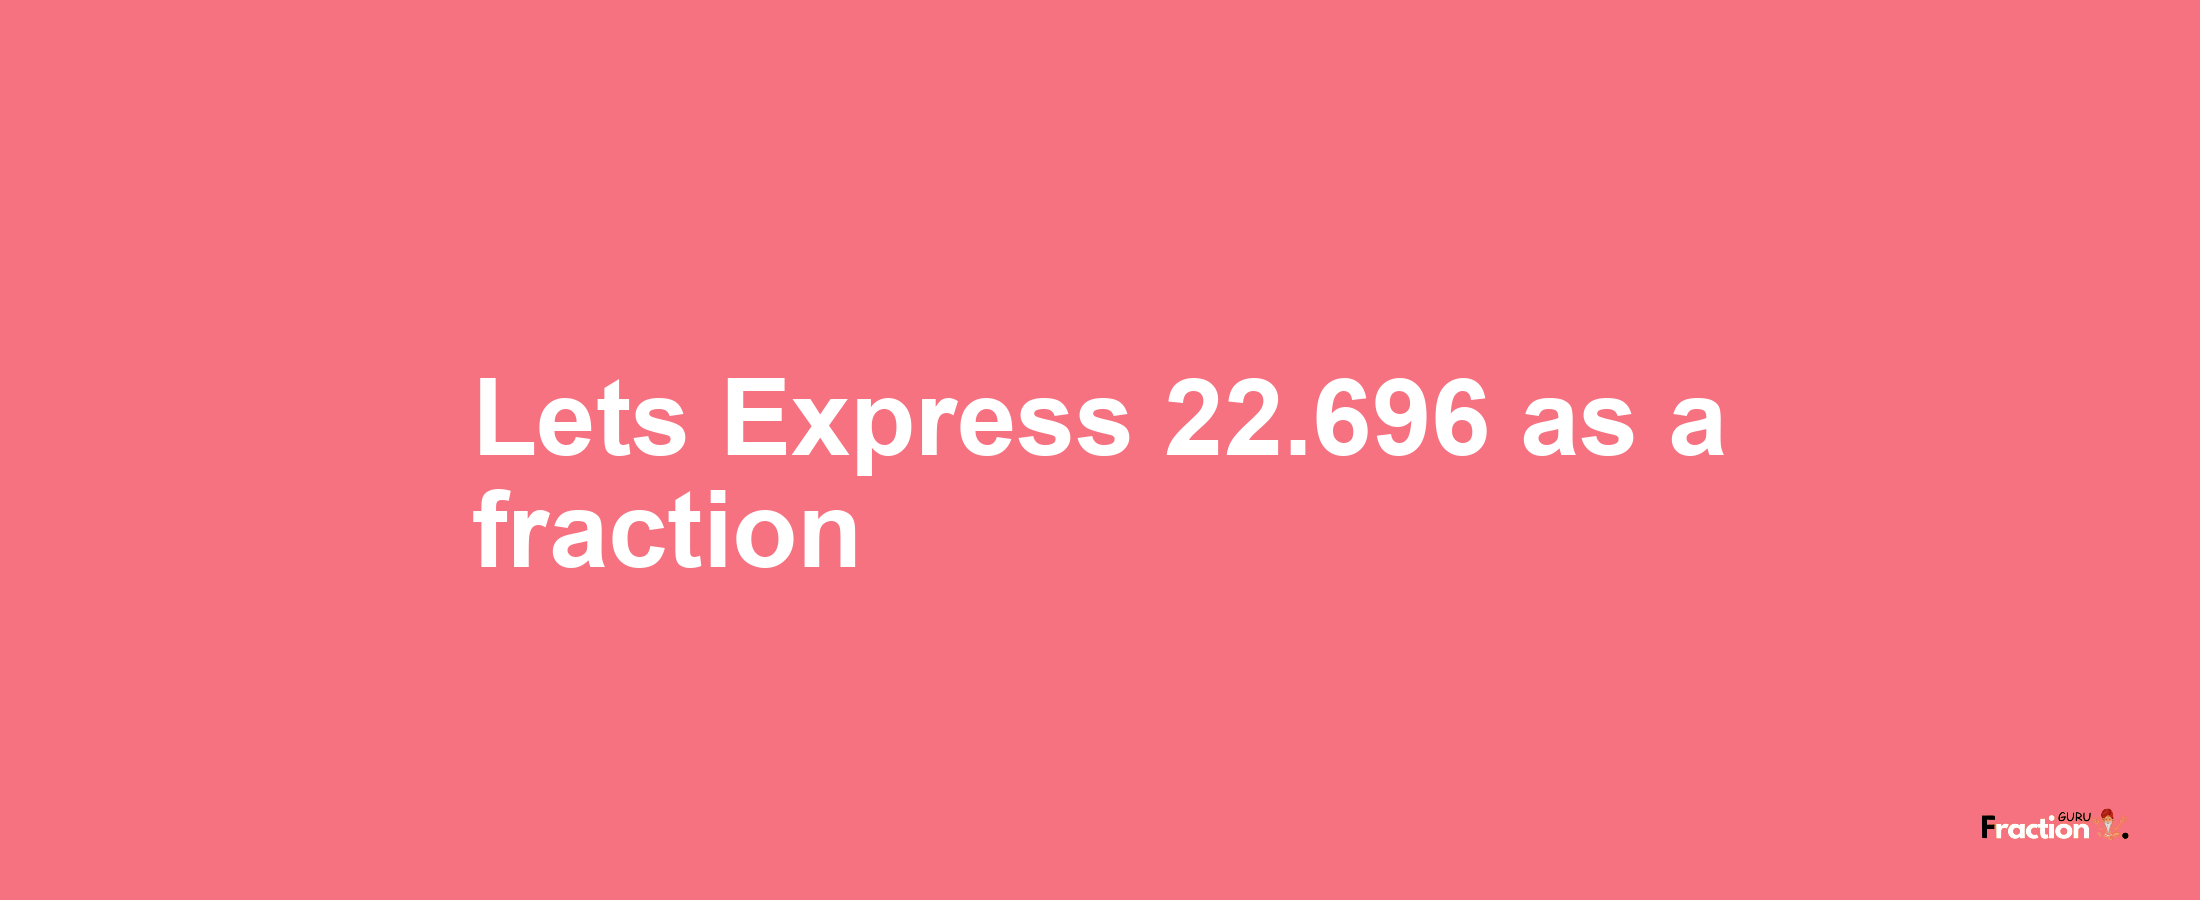 Lets Express 22.696 as afraction